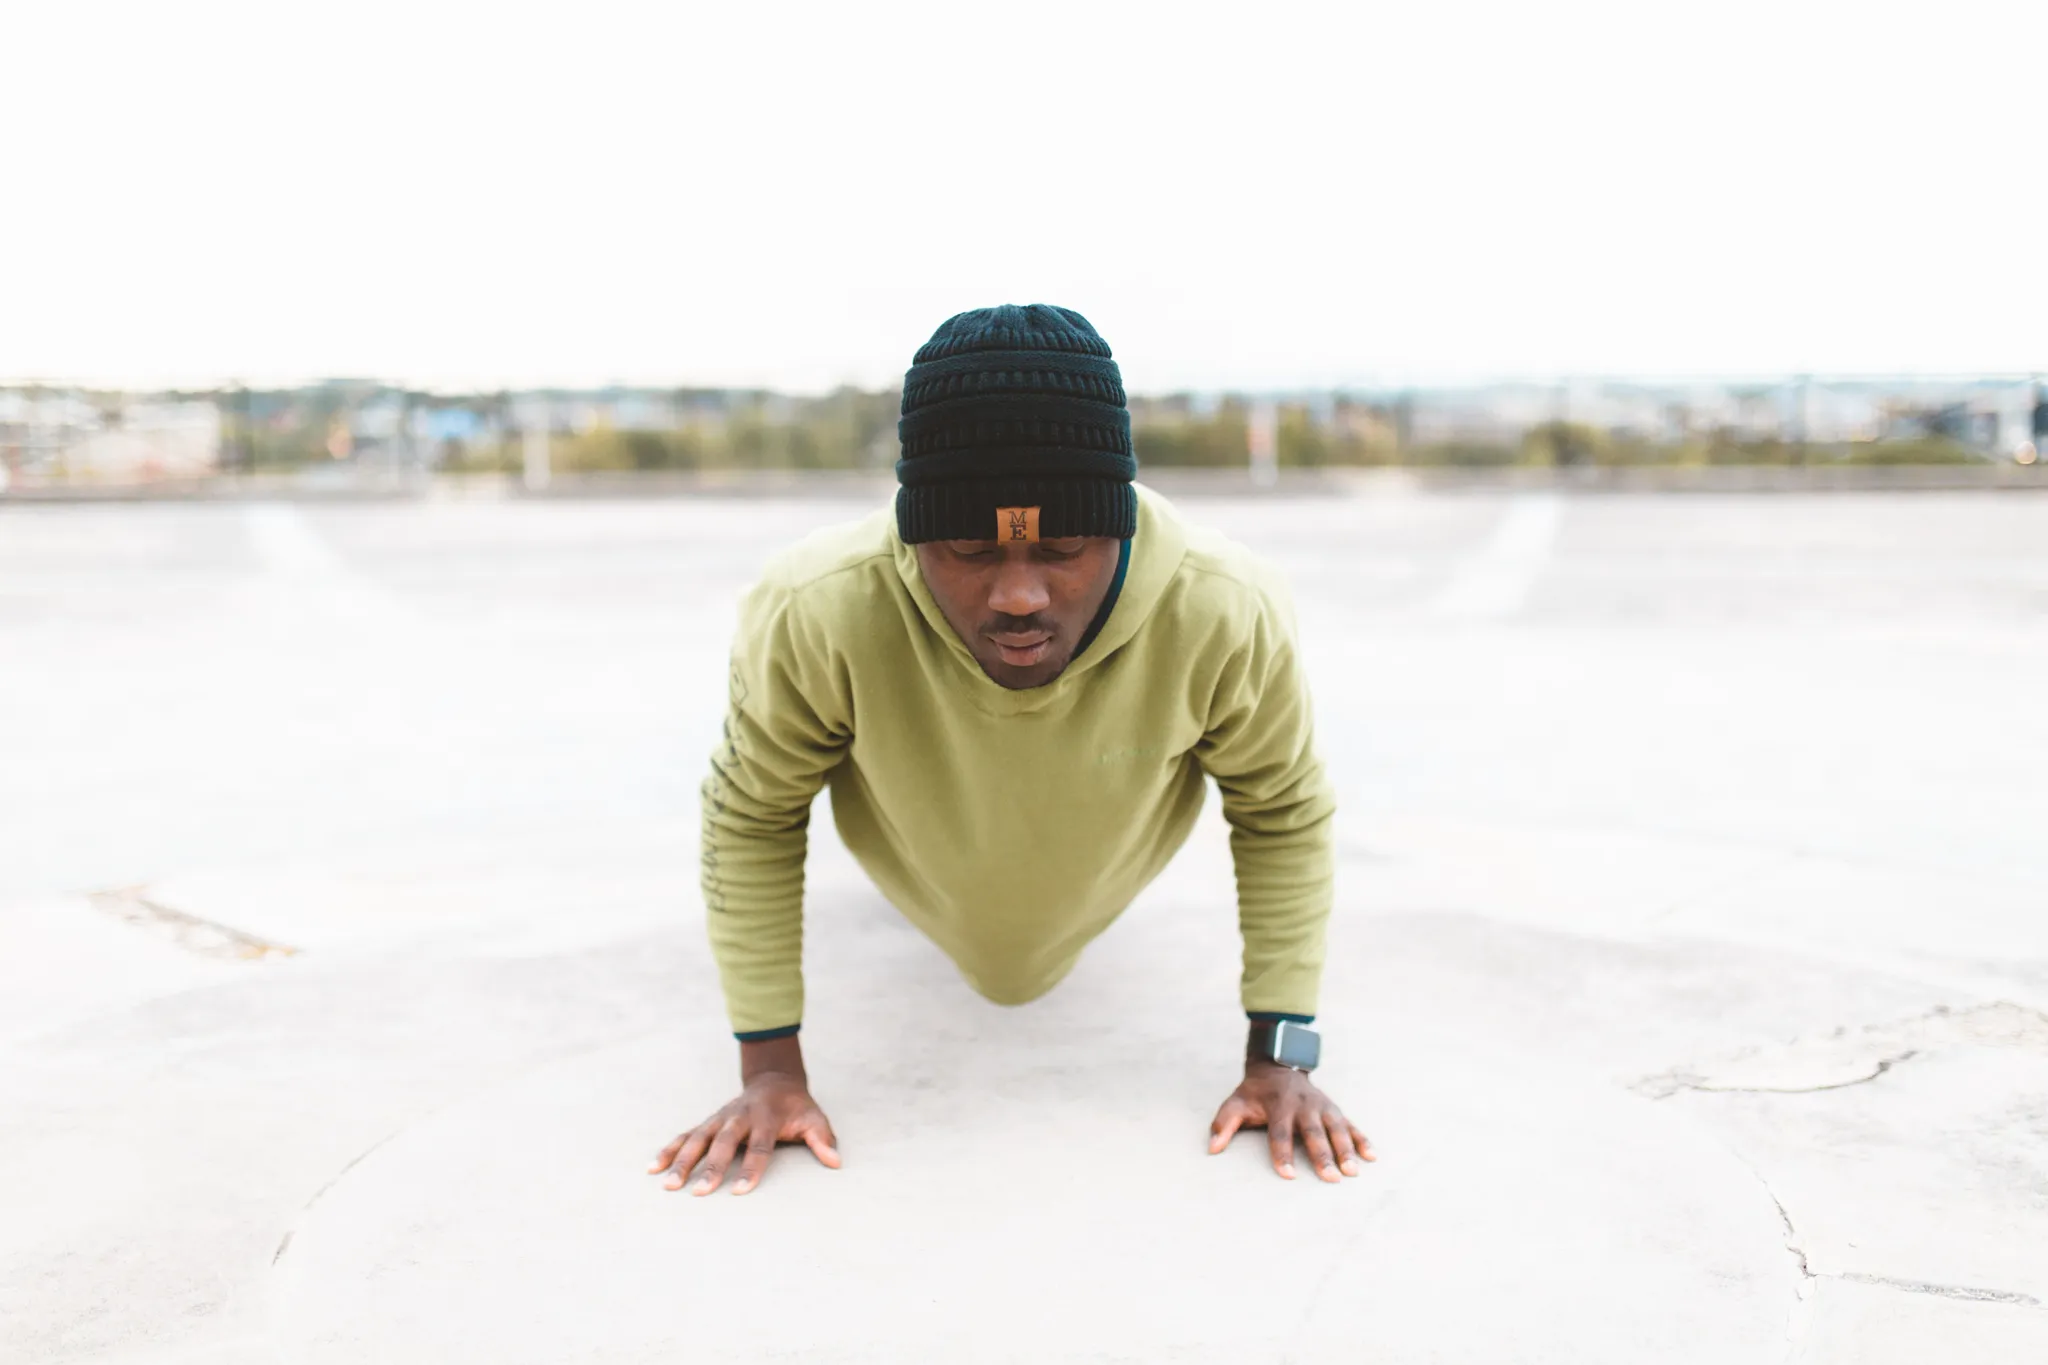 How To Do Push ups: The Beginner's Guide